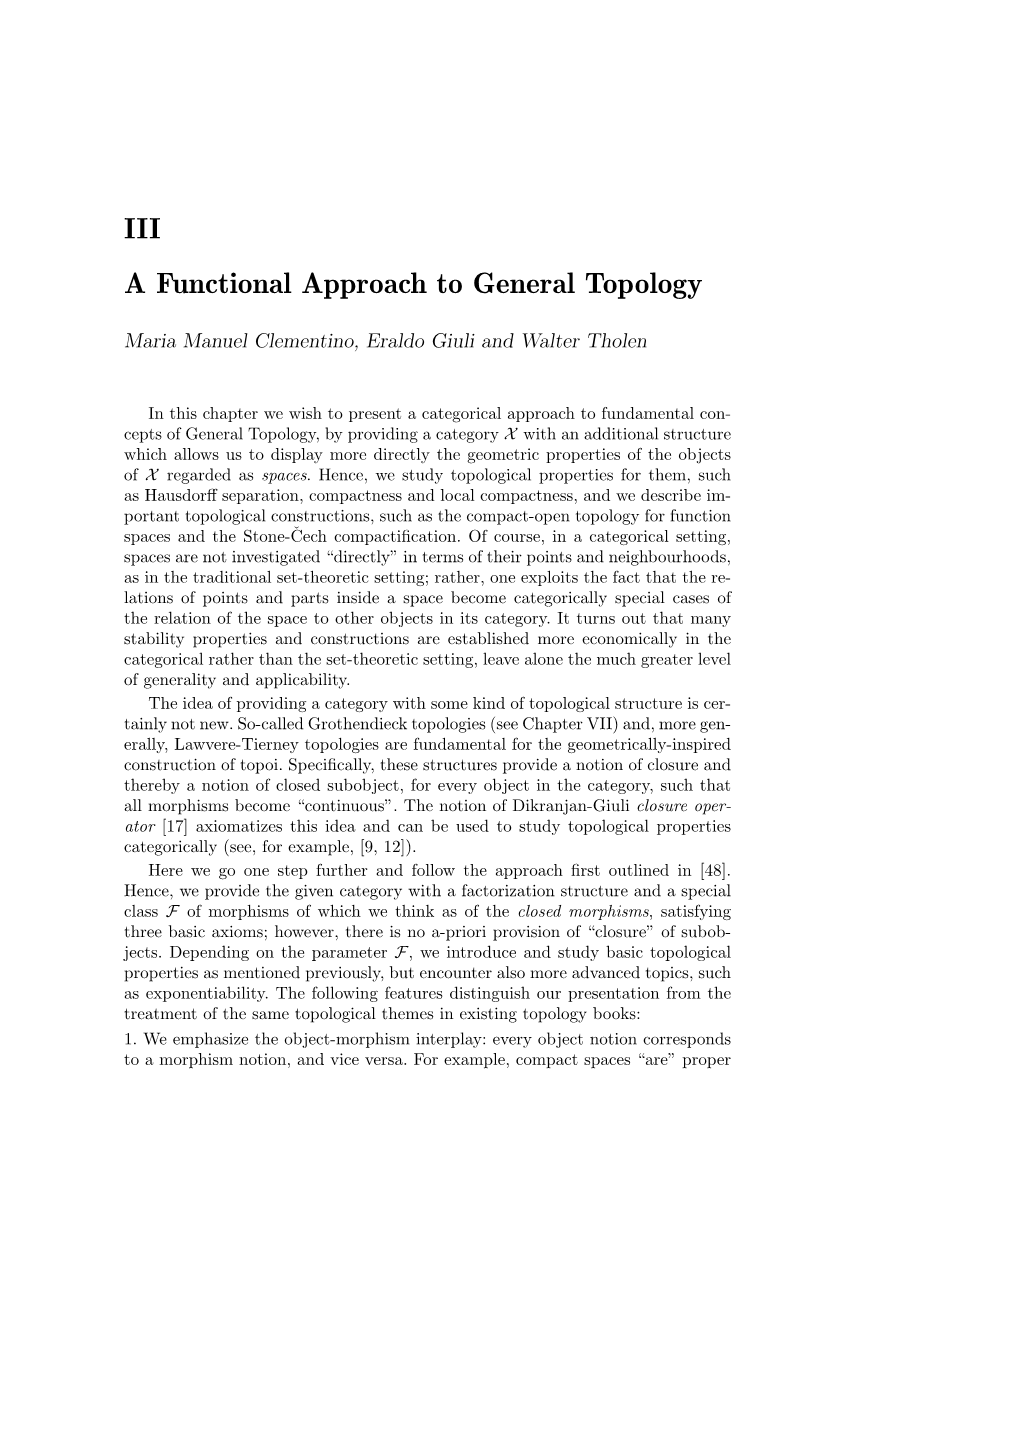 III a Functional Approach to General Topology